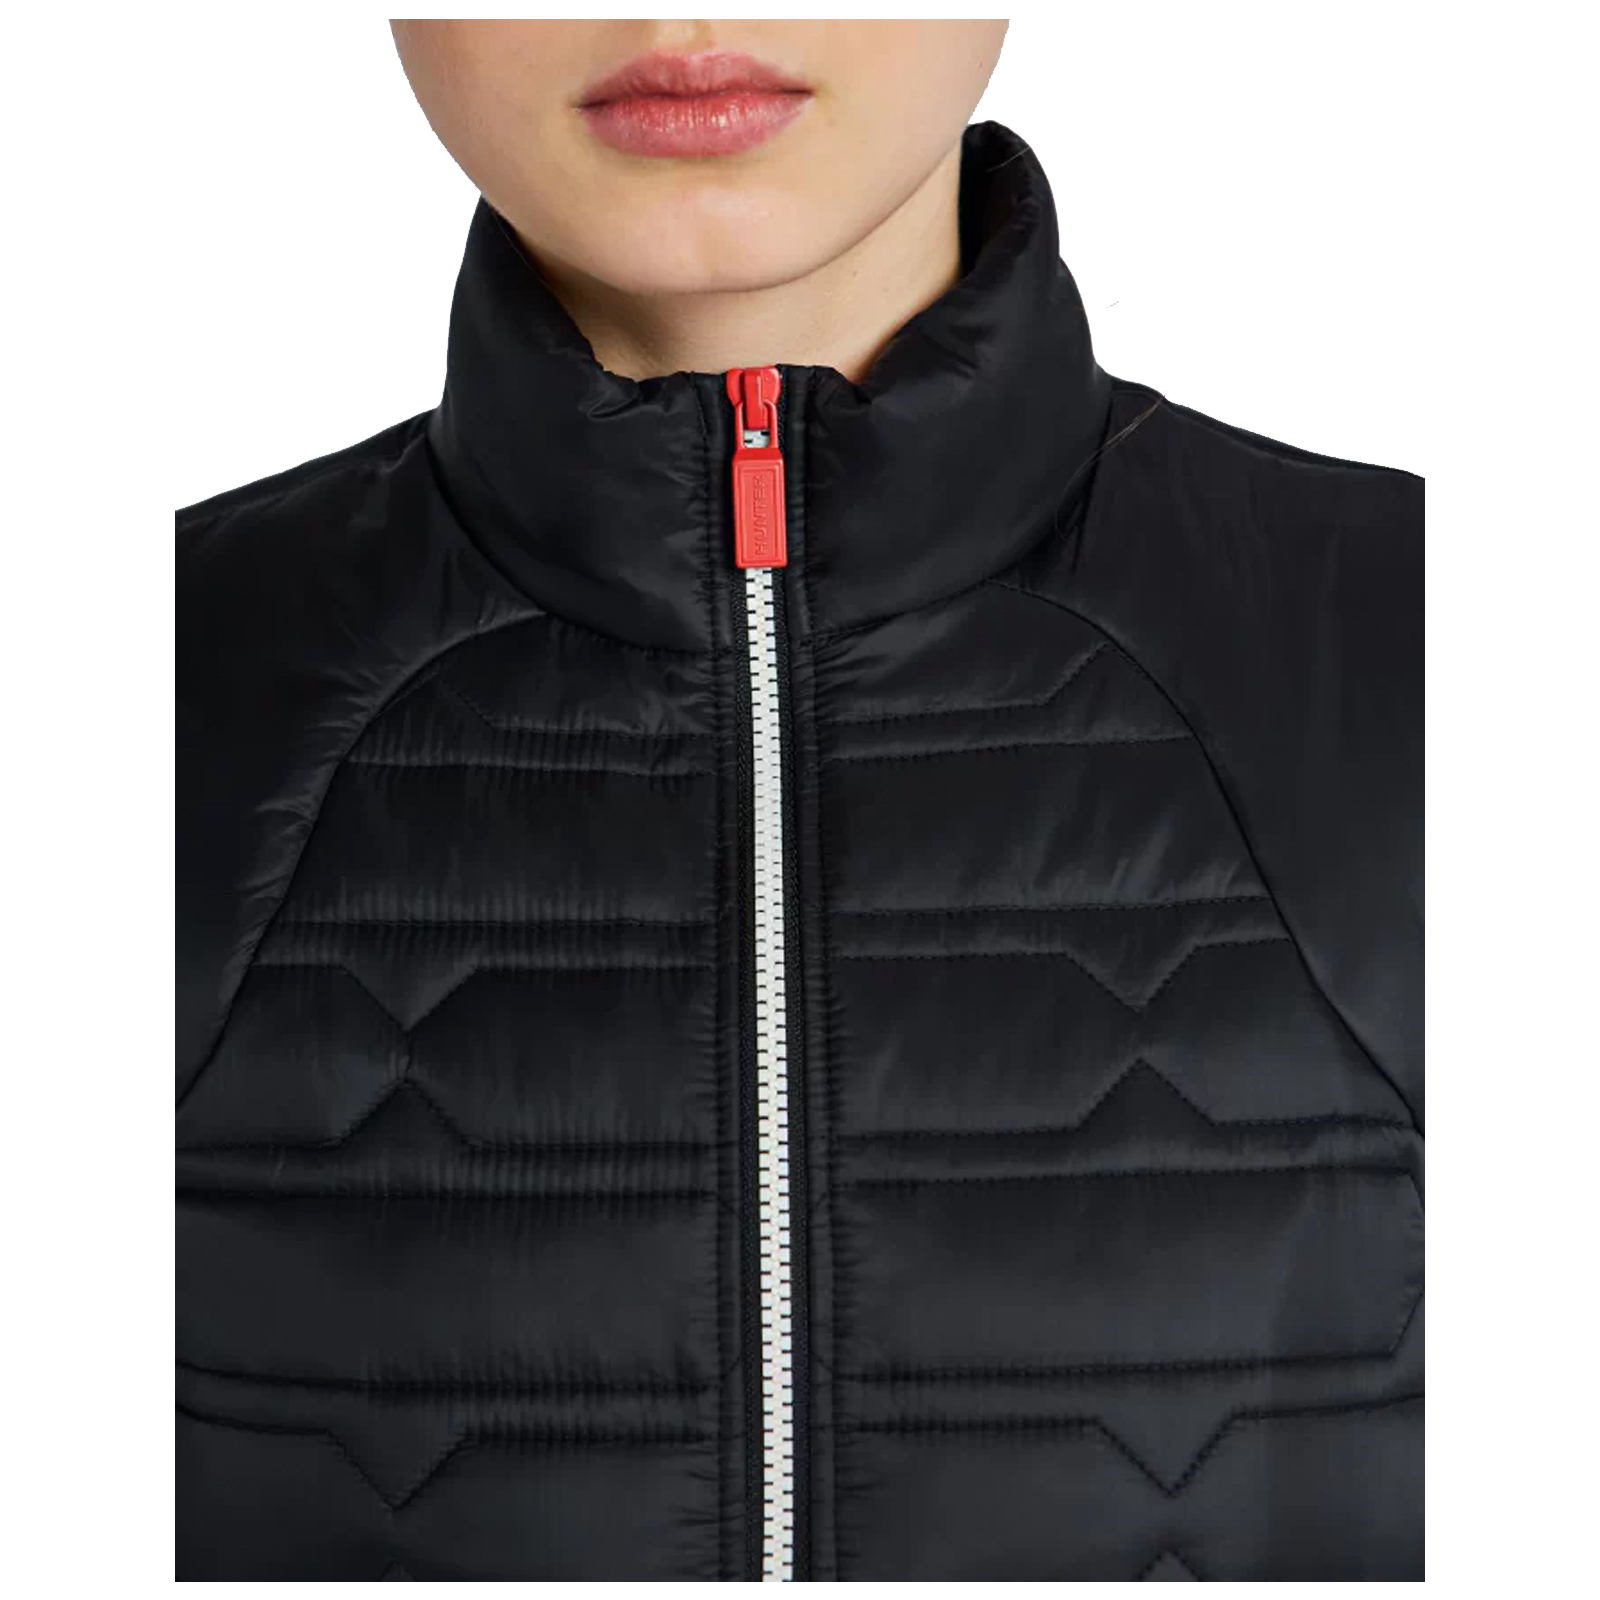 2020 Hunter Ladies Original Midlayer Gilet Insulated Quilted Hybrid Body Warmer